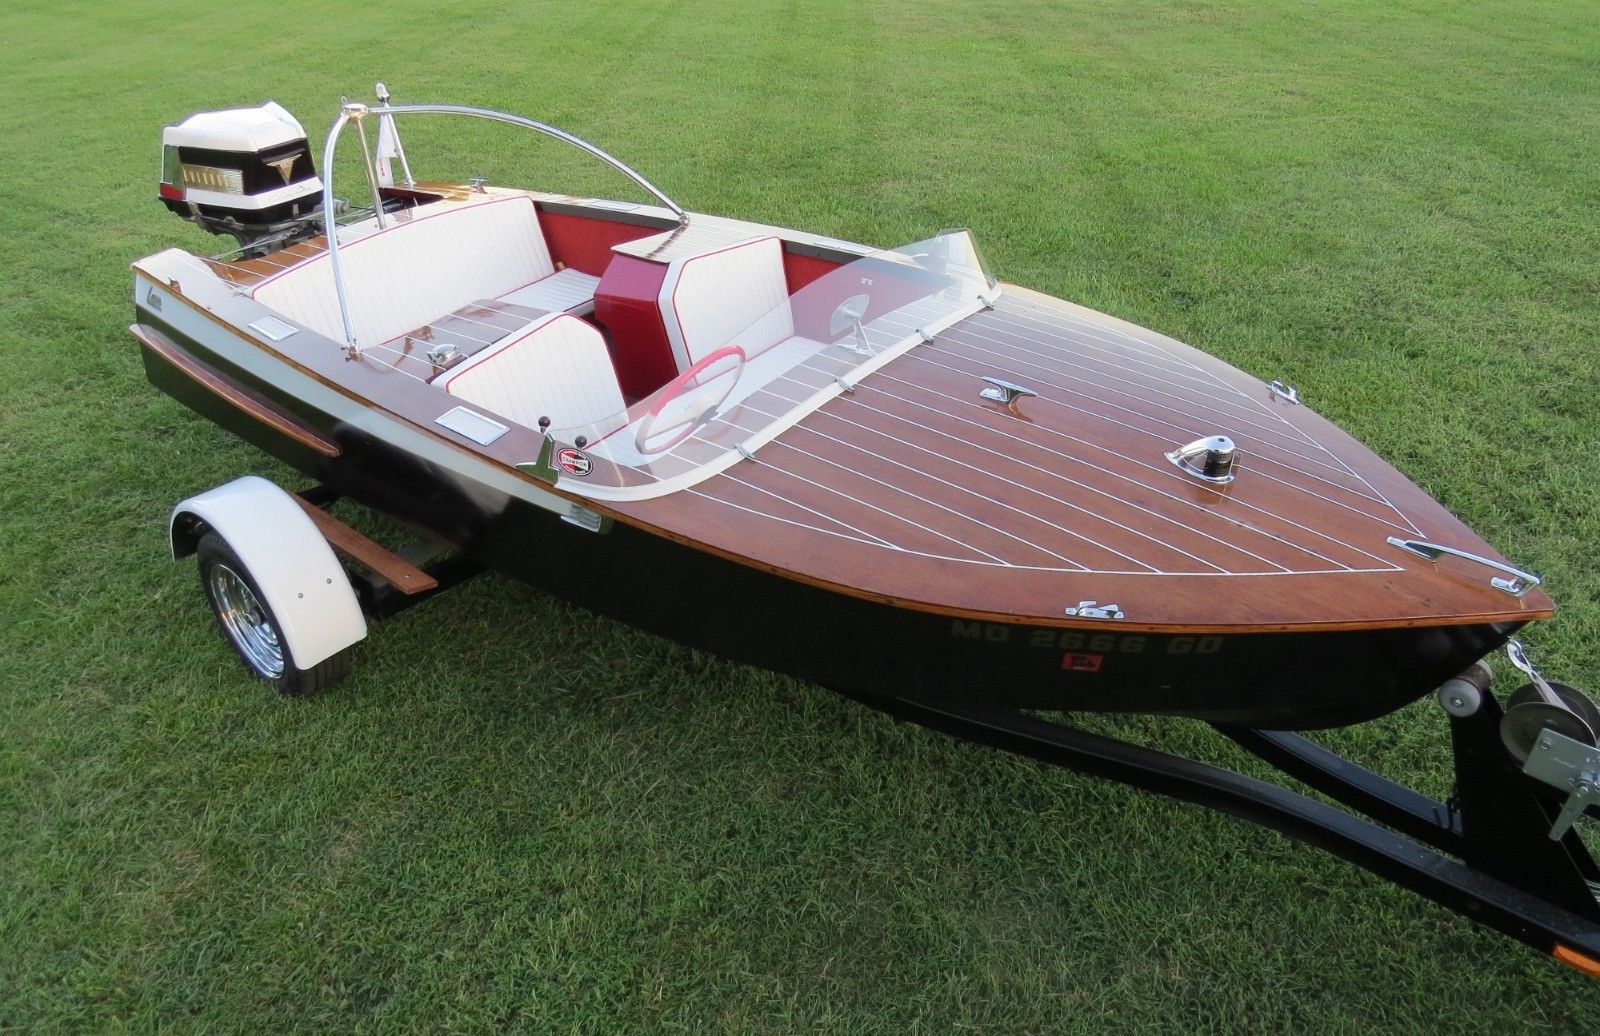 luger wood speed boat restored/custom 1959 for sale for $1